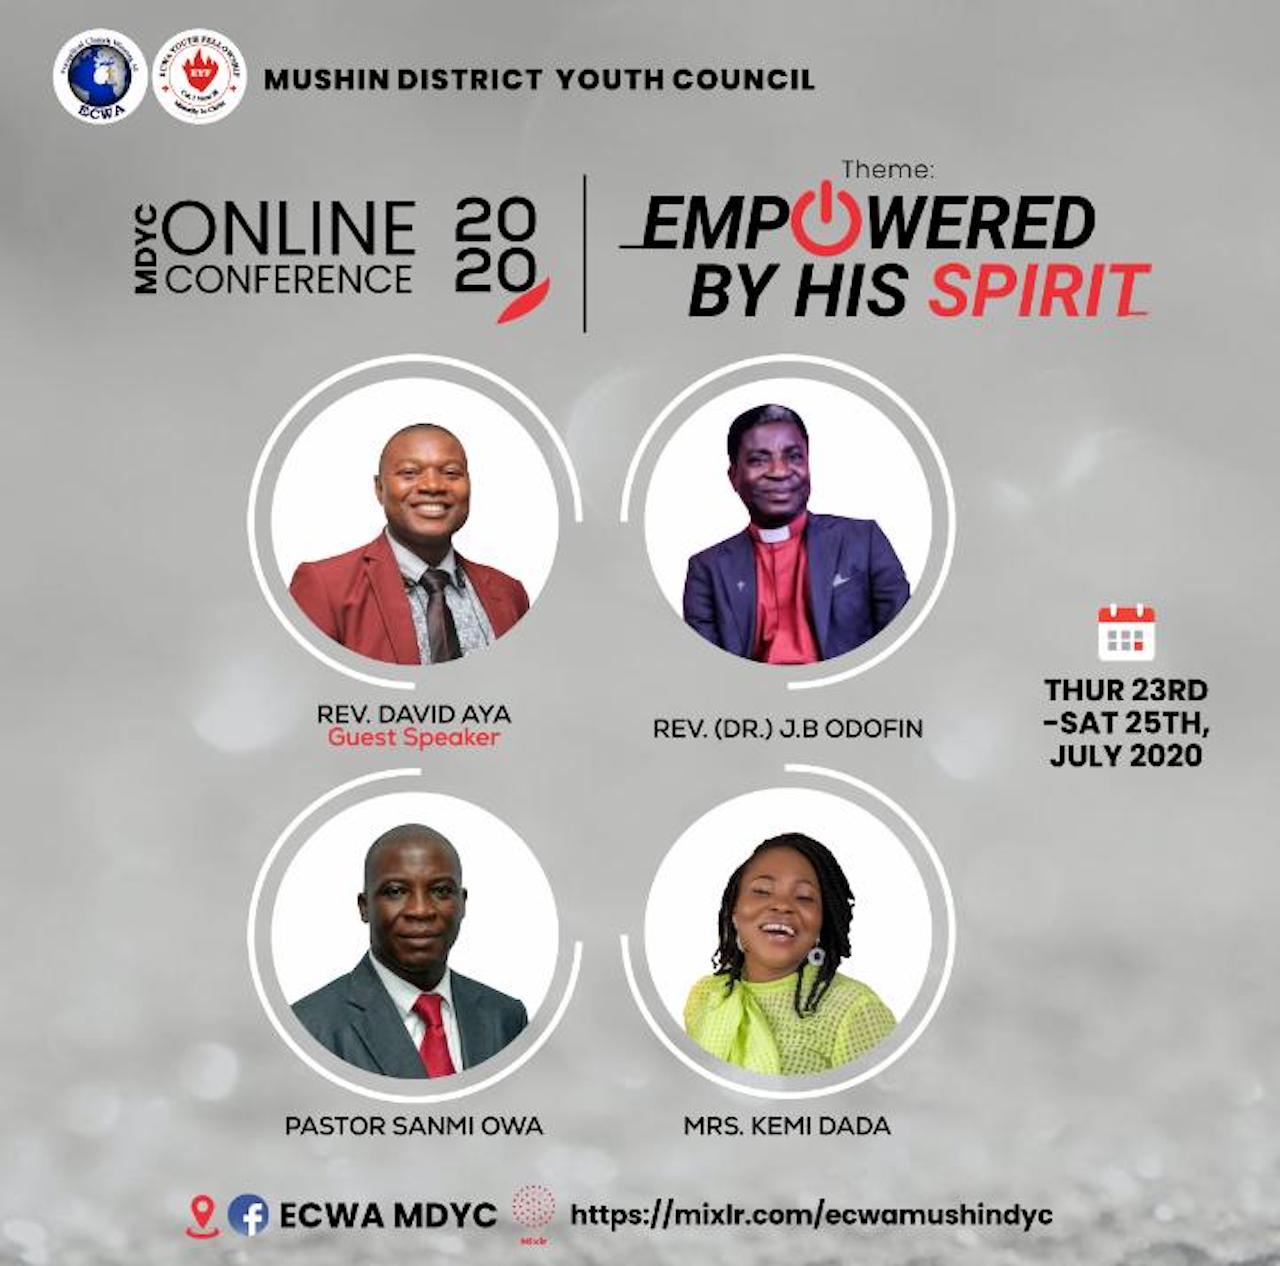 ECWA’s First-ever online Conference at Mushin DYC July 23-25, 2020